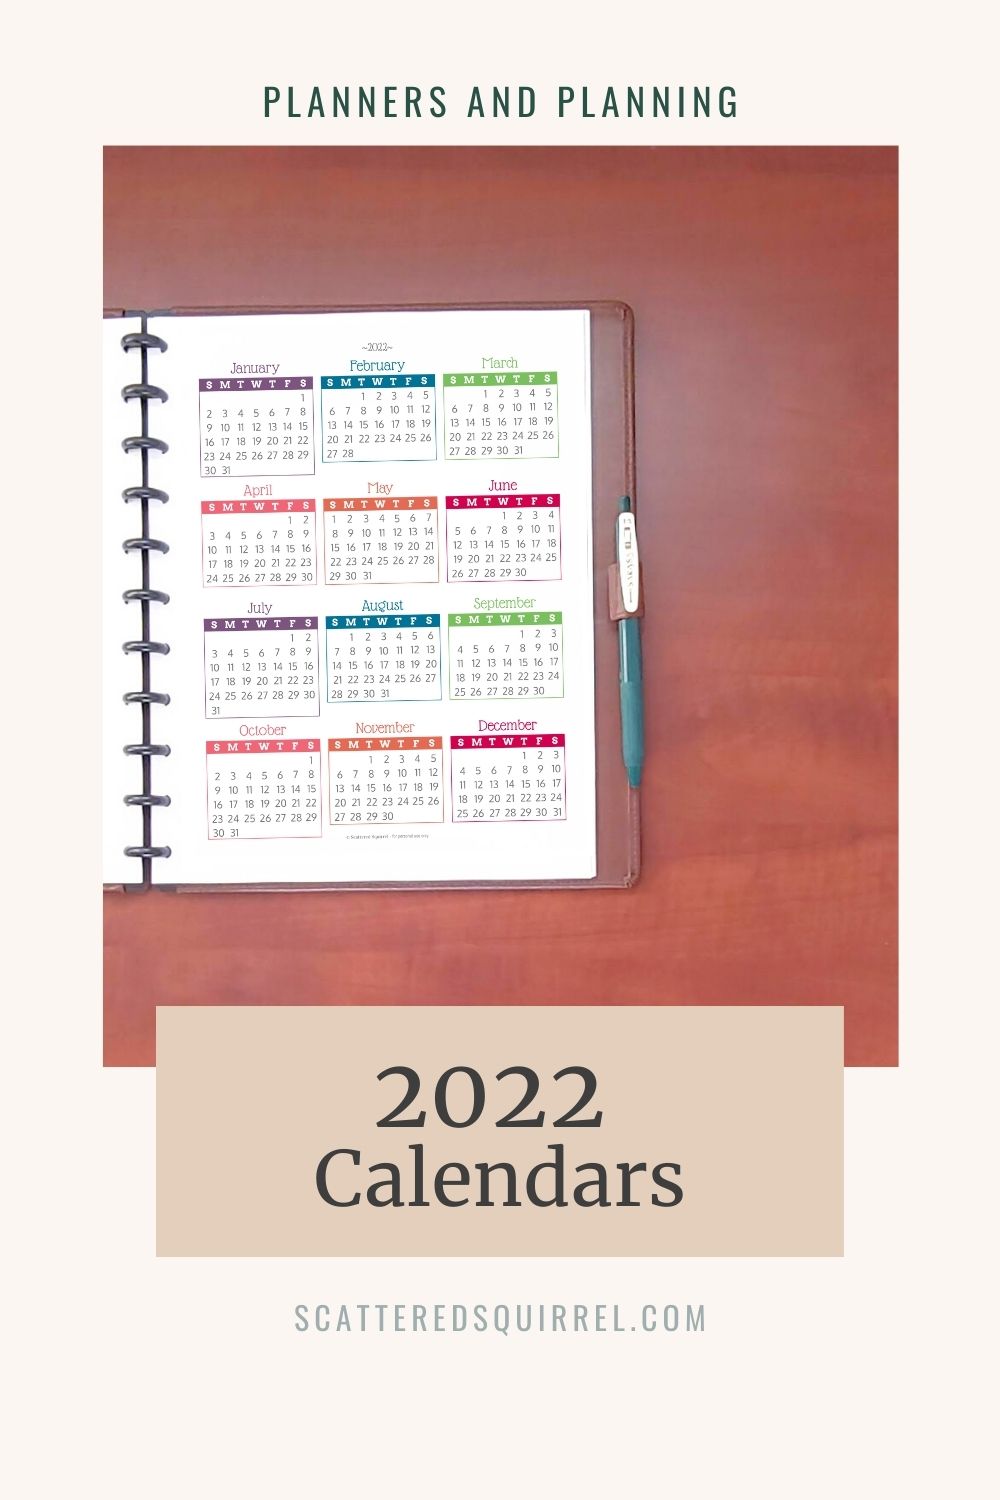 2022 Calendars – the New Year is Right Around the Corner